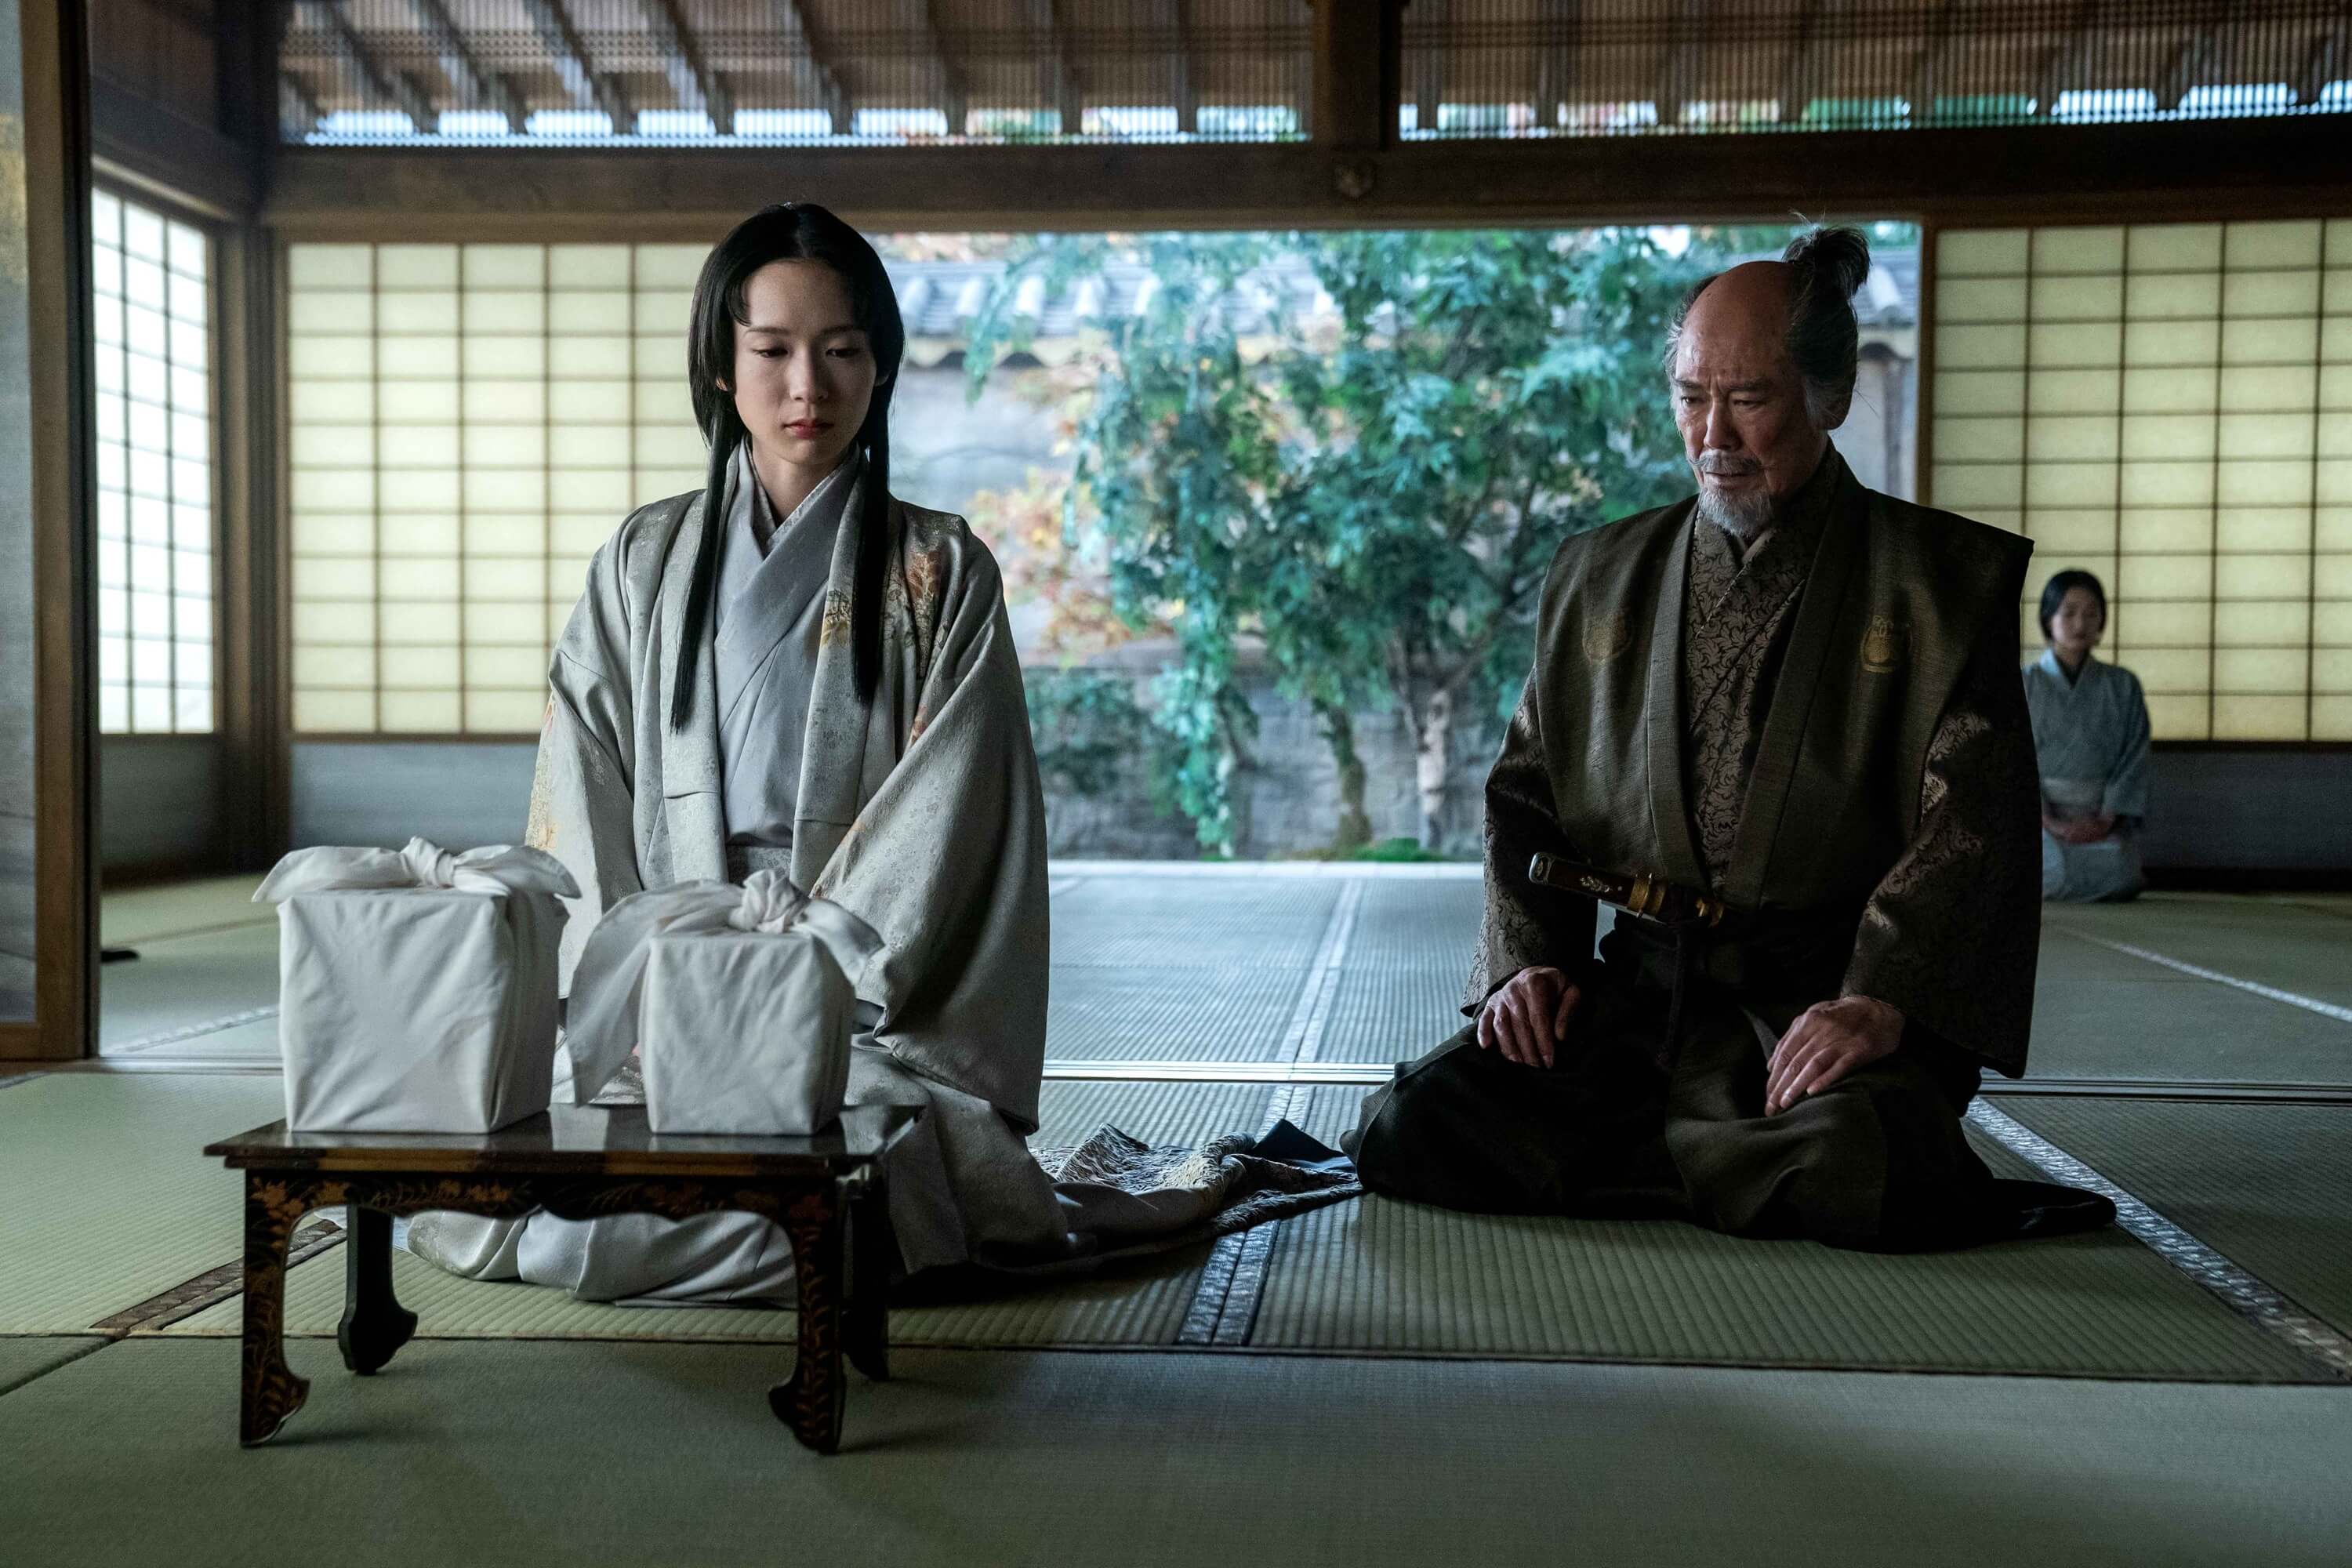 Shōgun recap: The epic turns up the action in “Tomorrow Is Tomorrow”